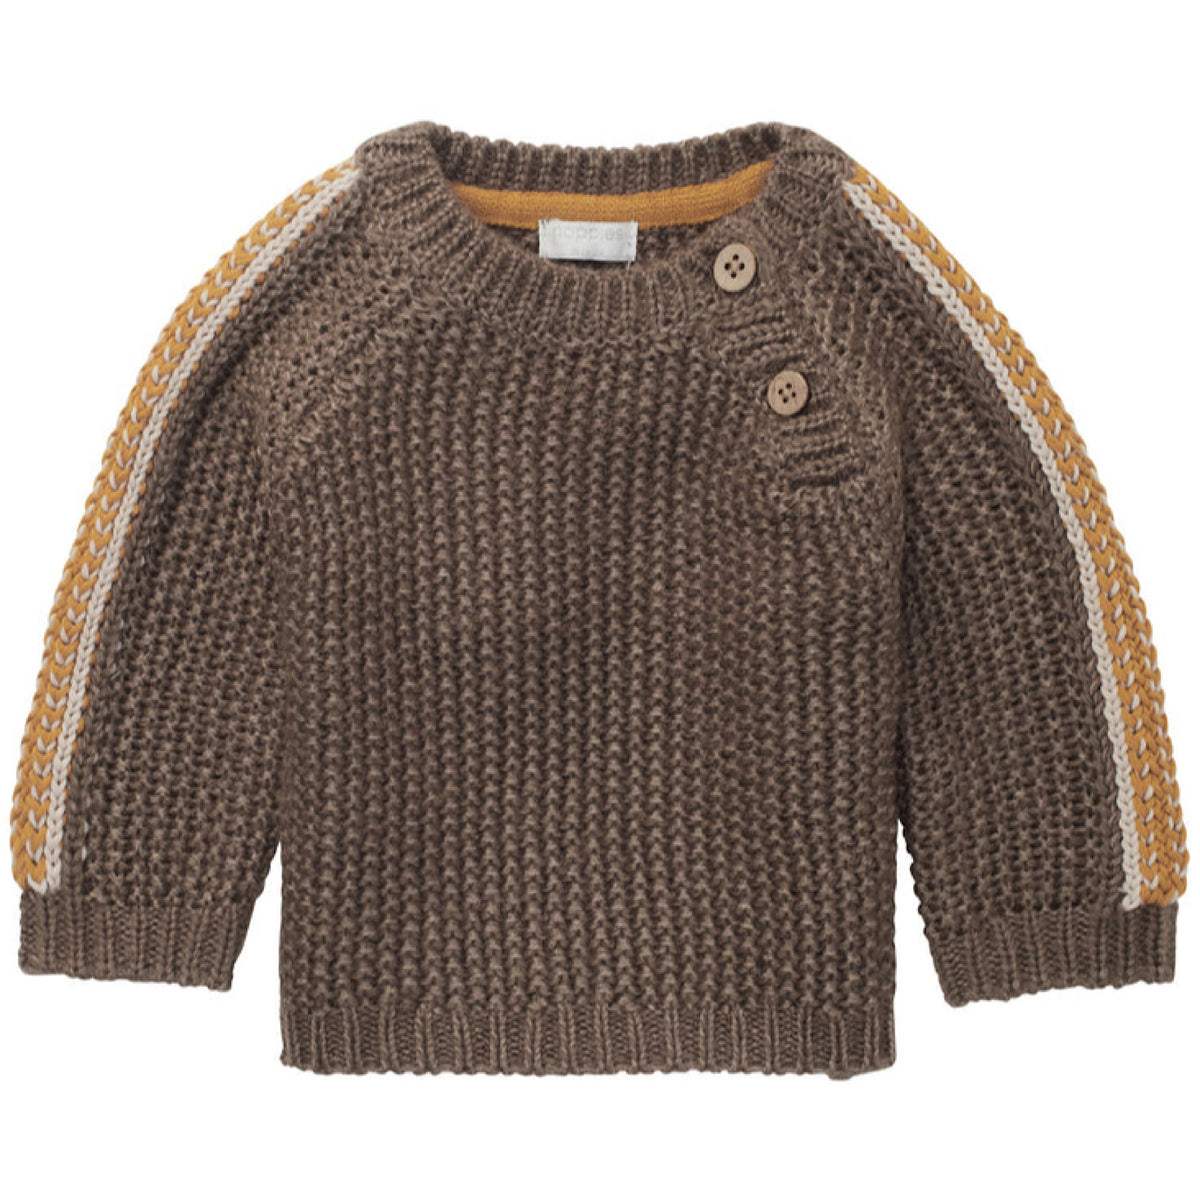 Knit Sweater with Wooden Buttons